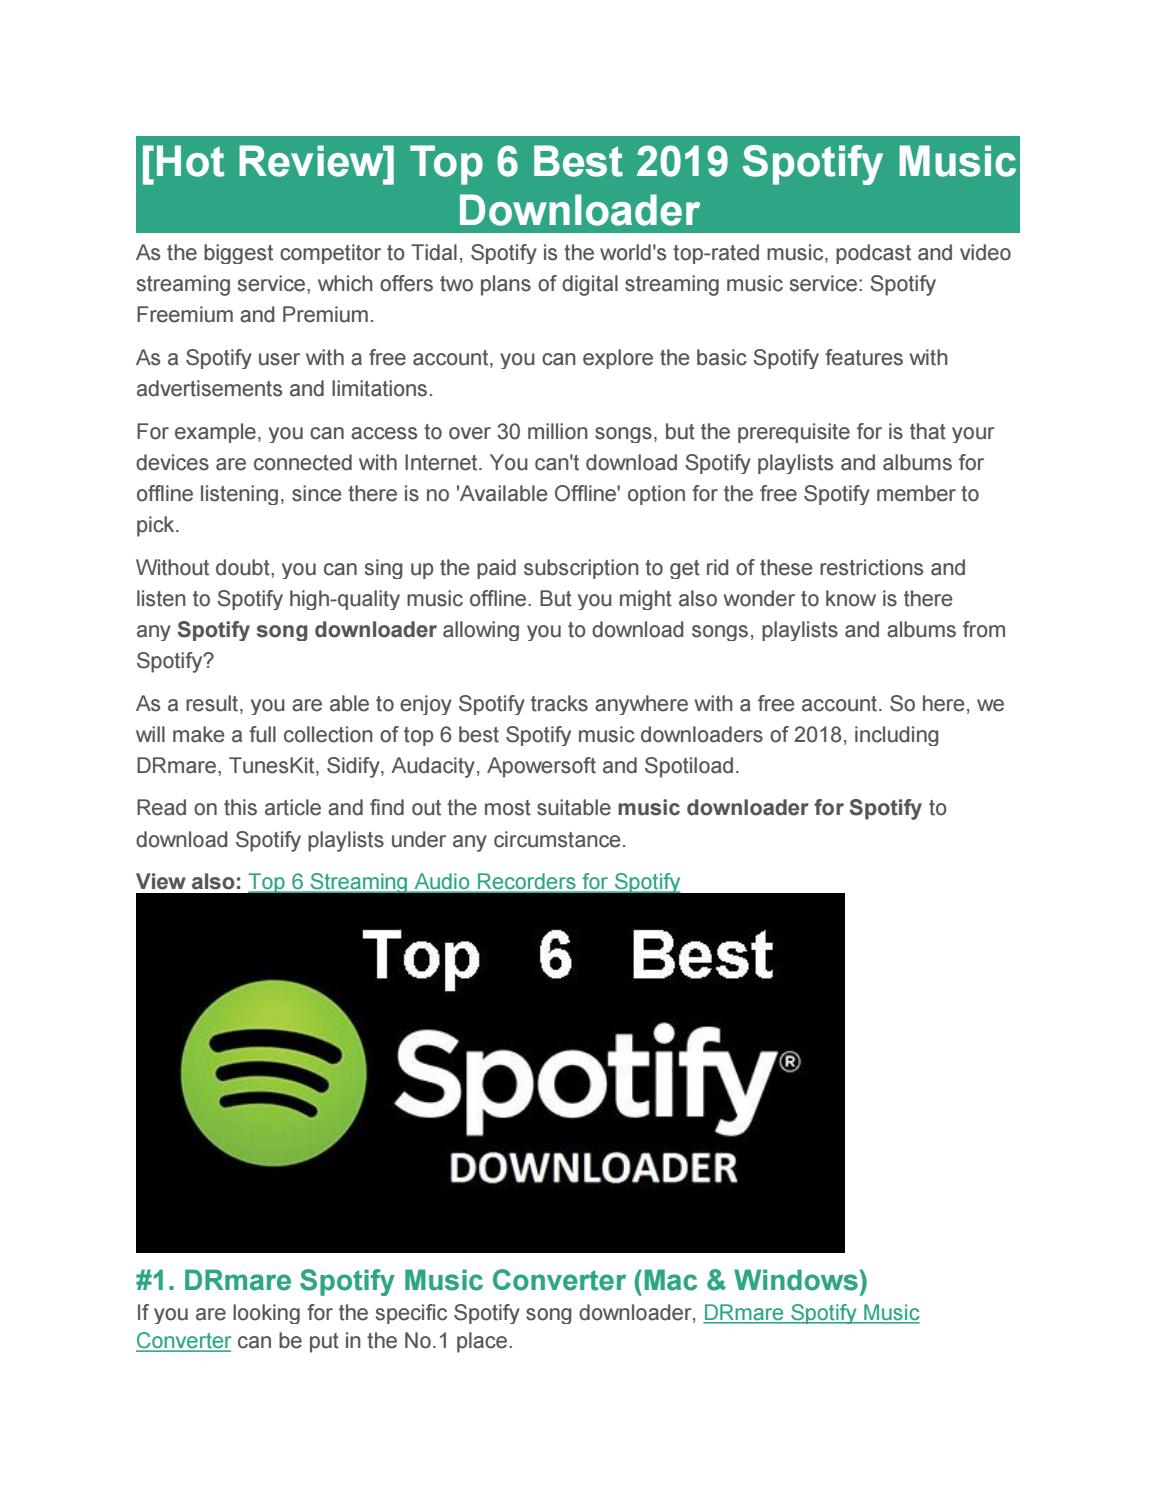 Download free music from spotify